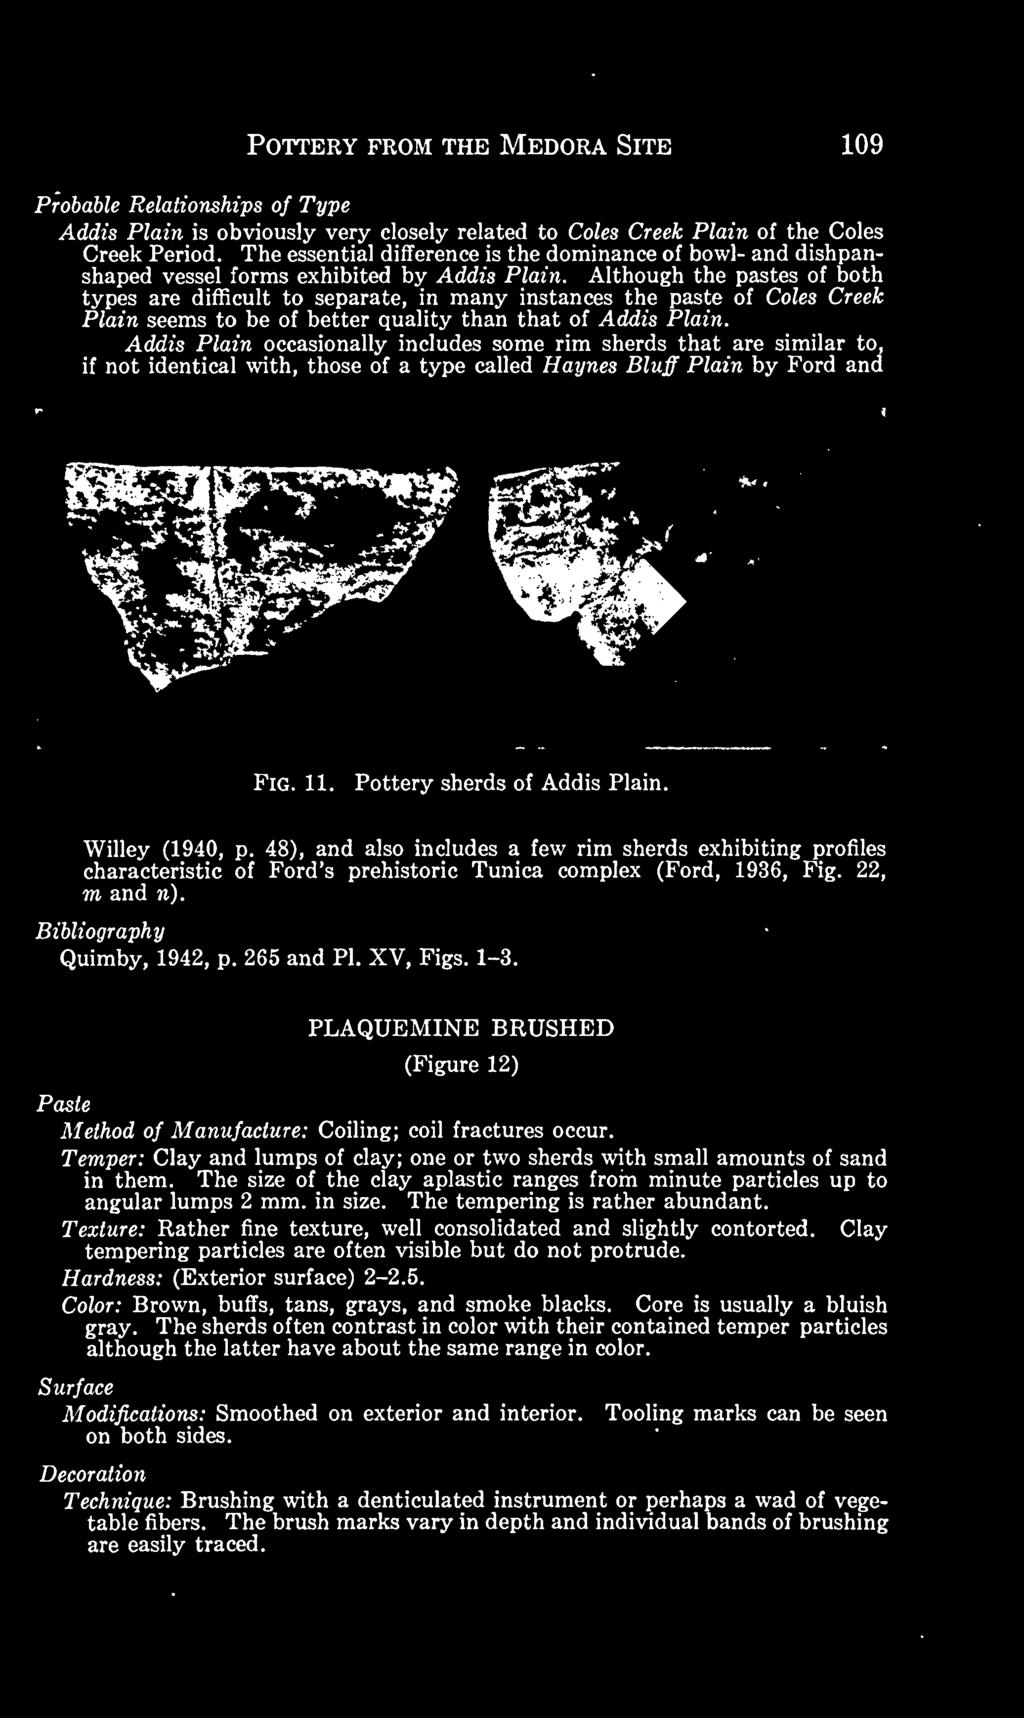 Willey (1940, p. 48), and also includes a few rim sherds exhibiting profiles characteristic of Ford's prehistoric Tunica complex (Ford, 1936, Fig. 22, m and n). Bibliography Quimby, 1942, p.